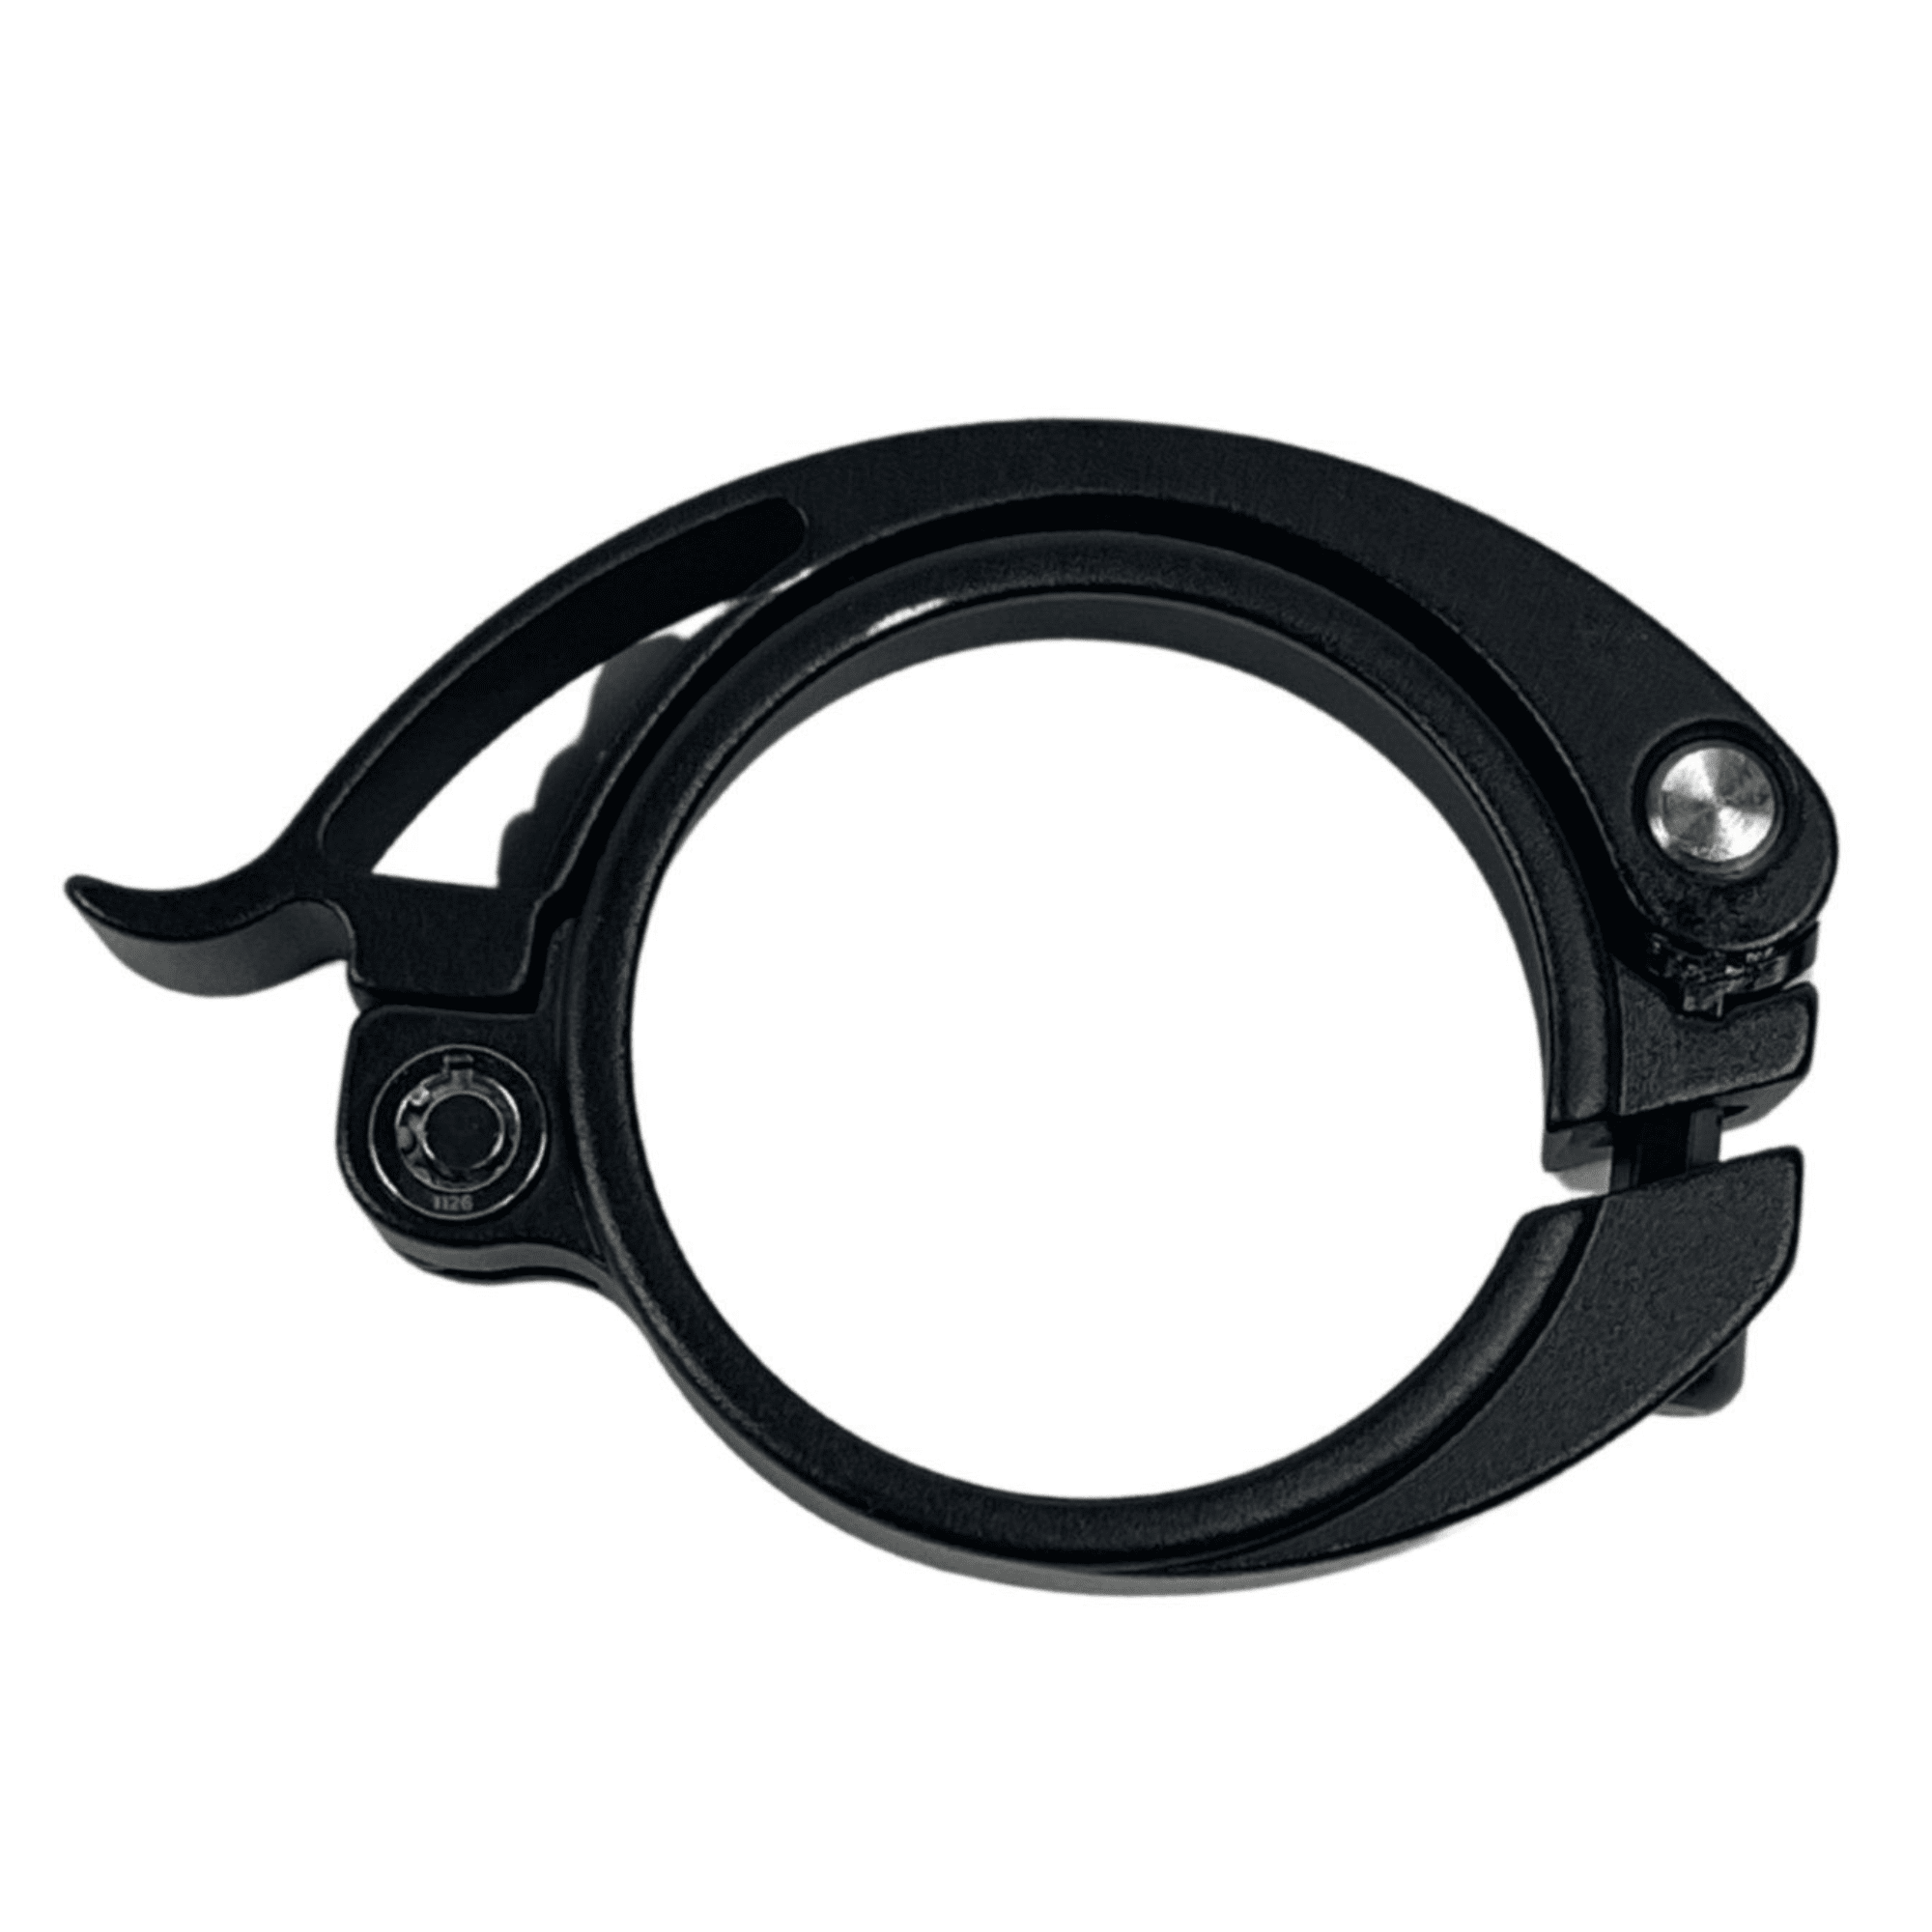 Clamp Lock for Dolphin Qualisports USA